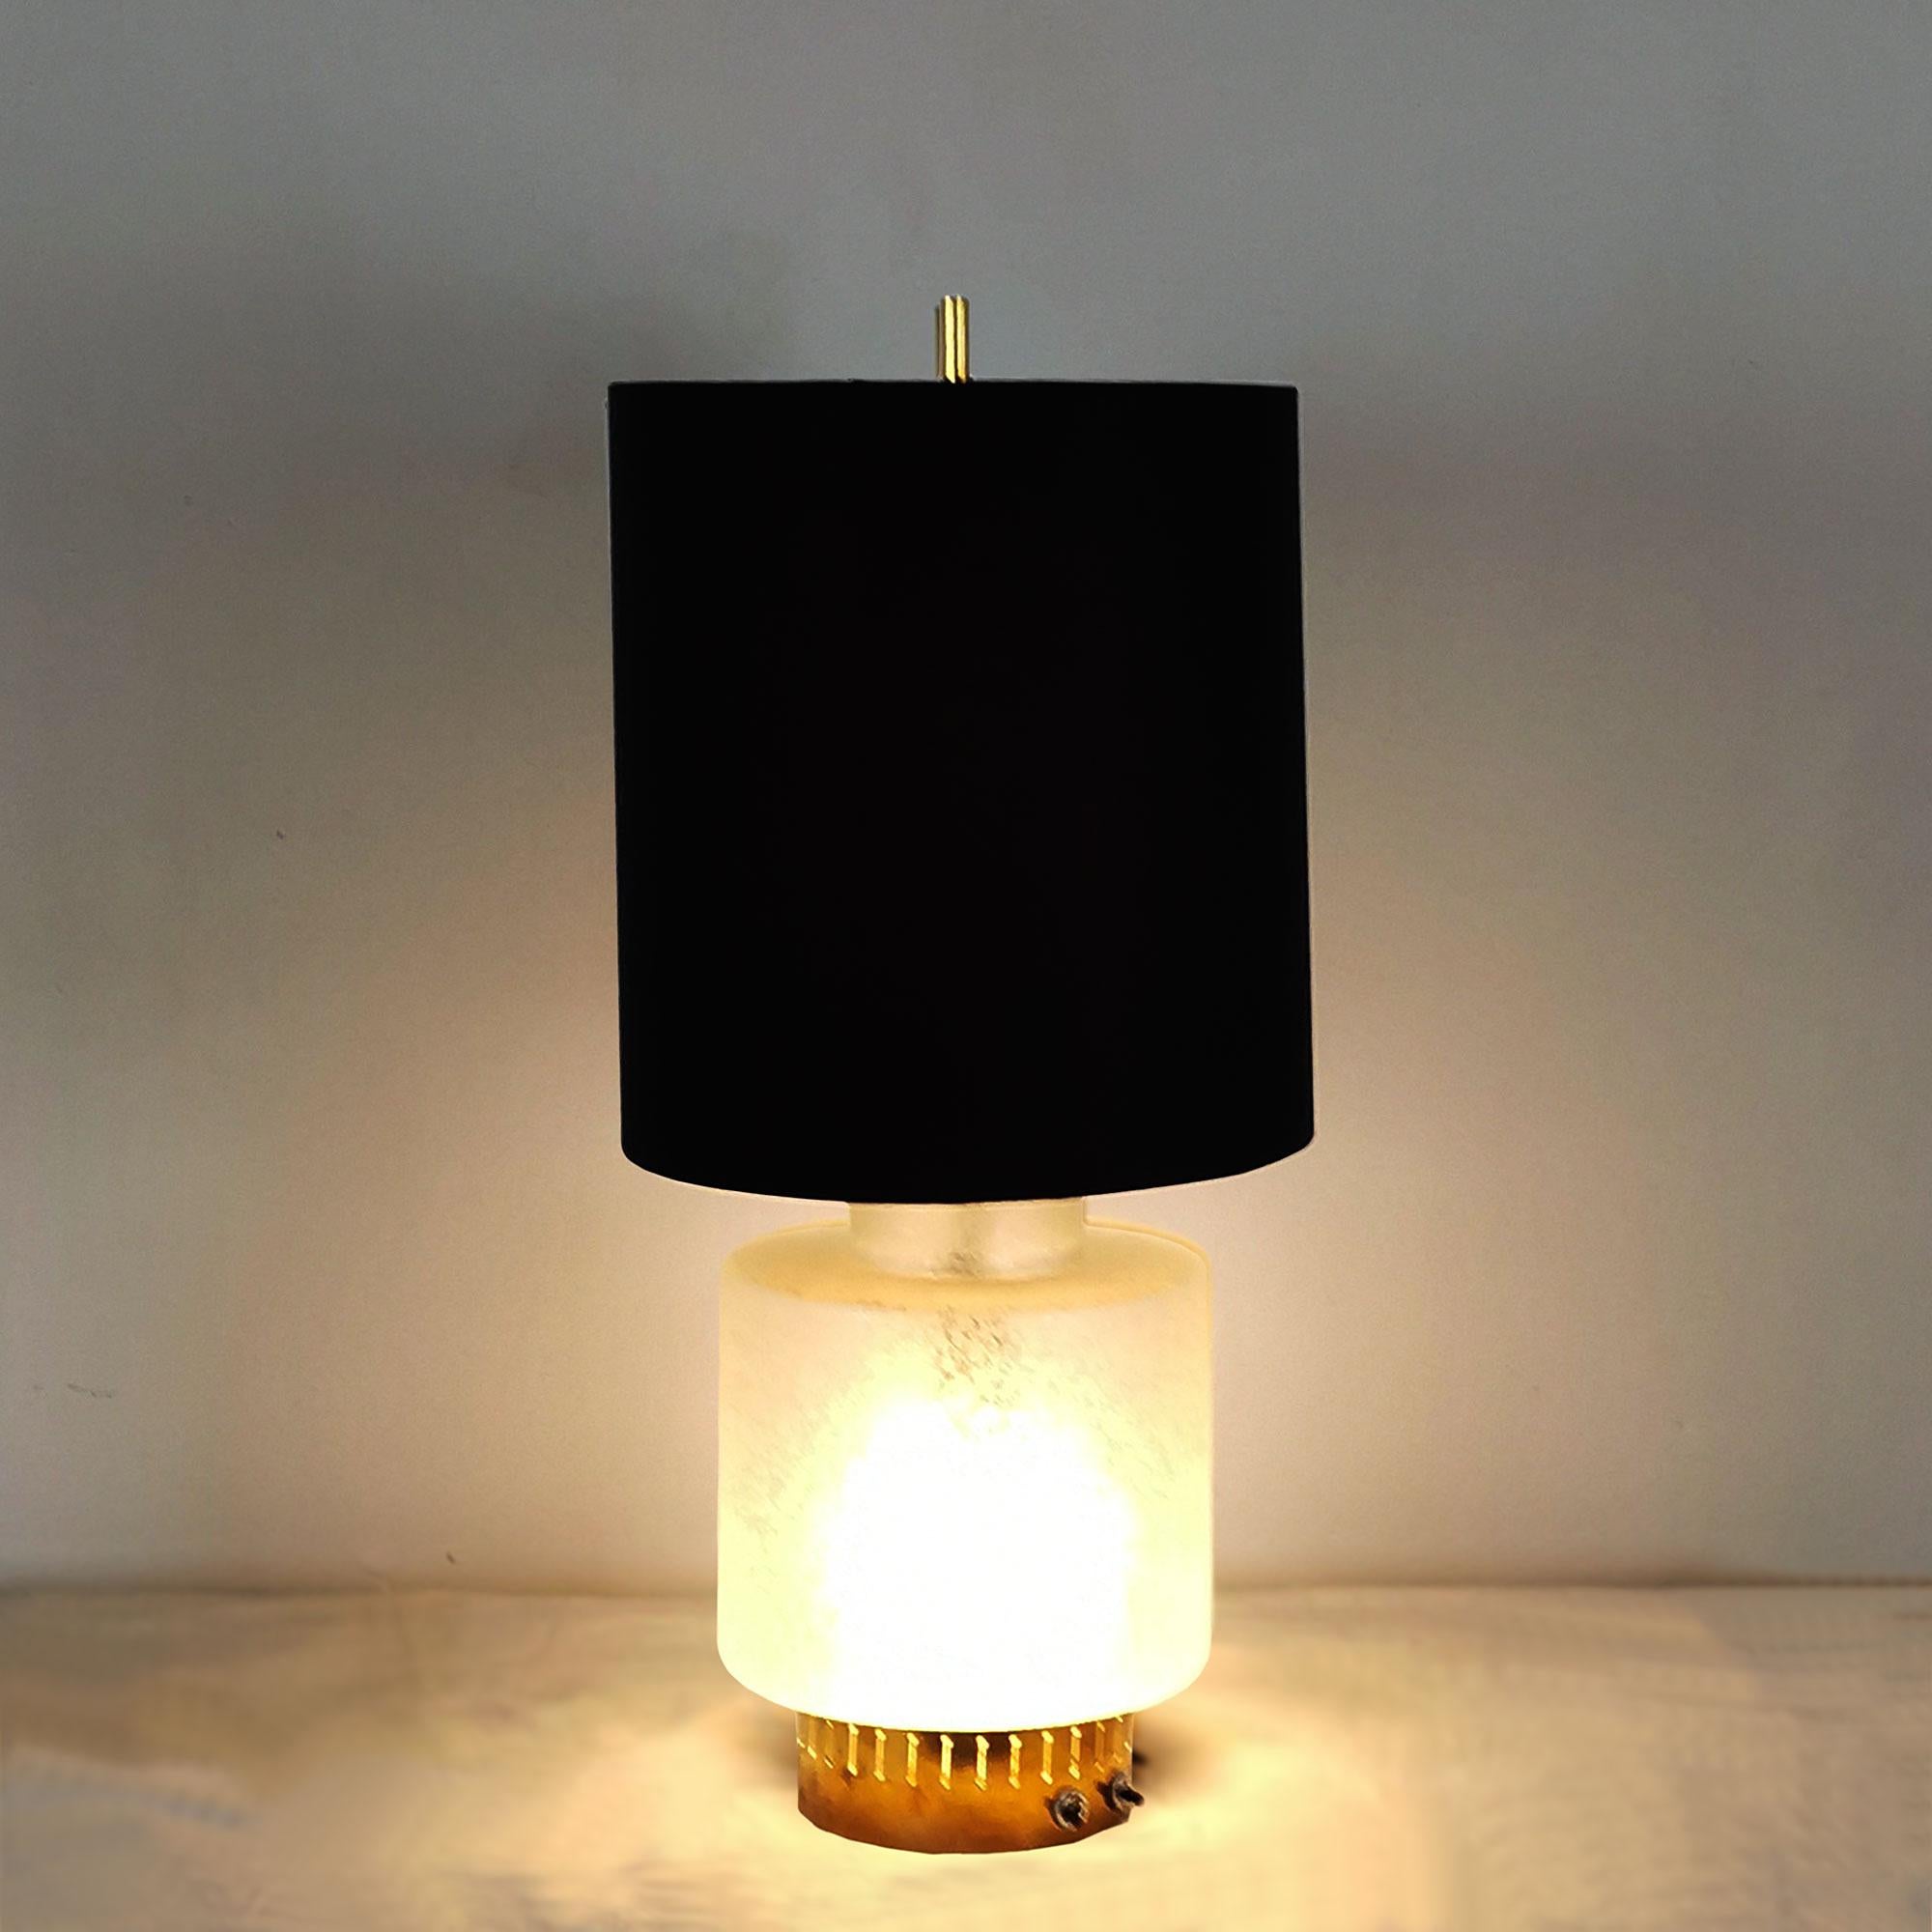 Mid-Century Modern Table Lamp by Stilnovo, Brass and Acid Worked Glass - Italy For Sale 2